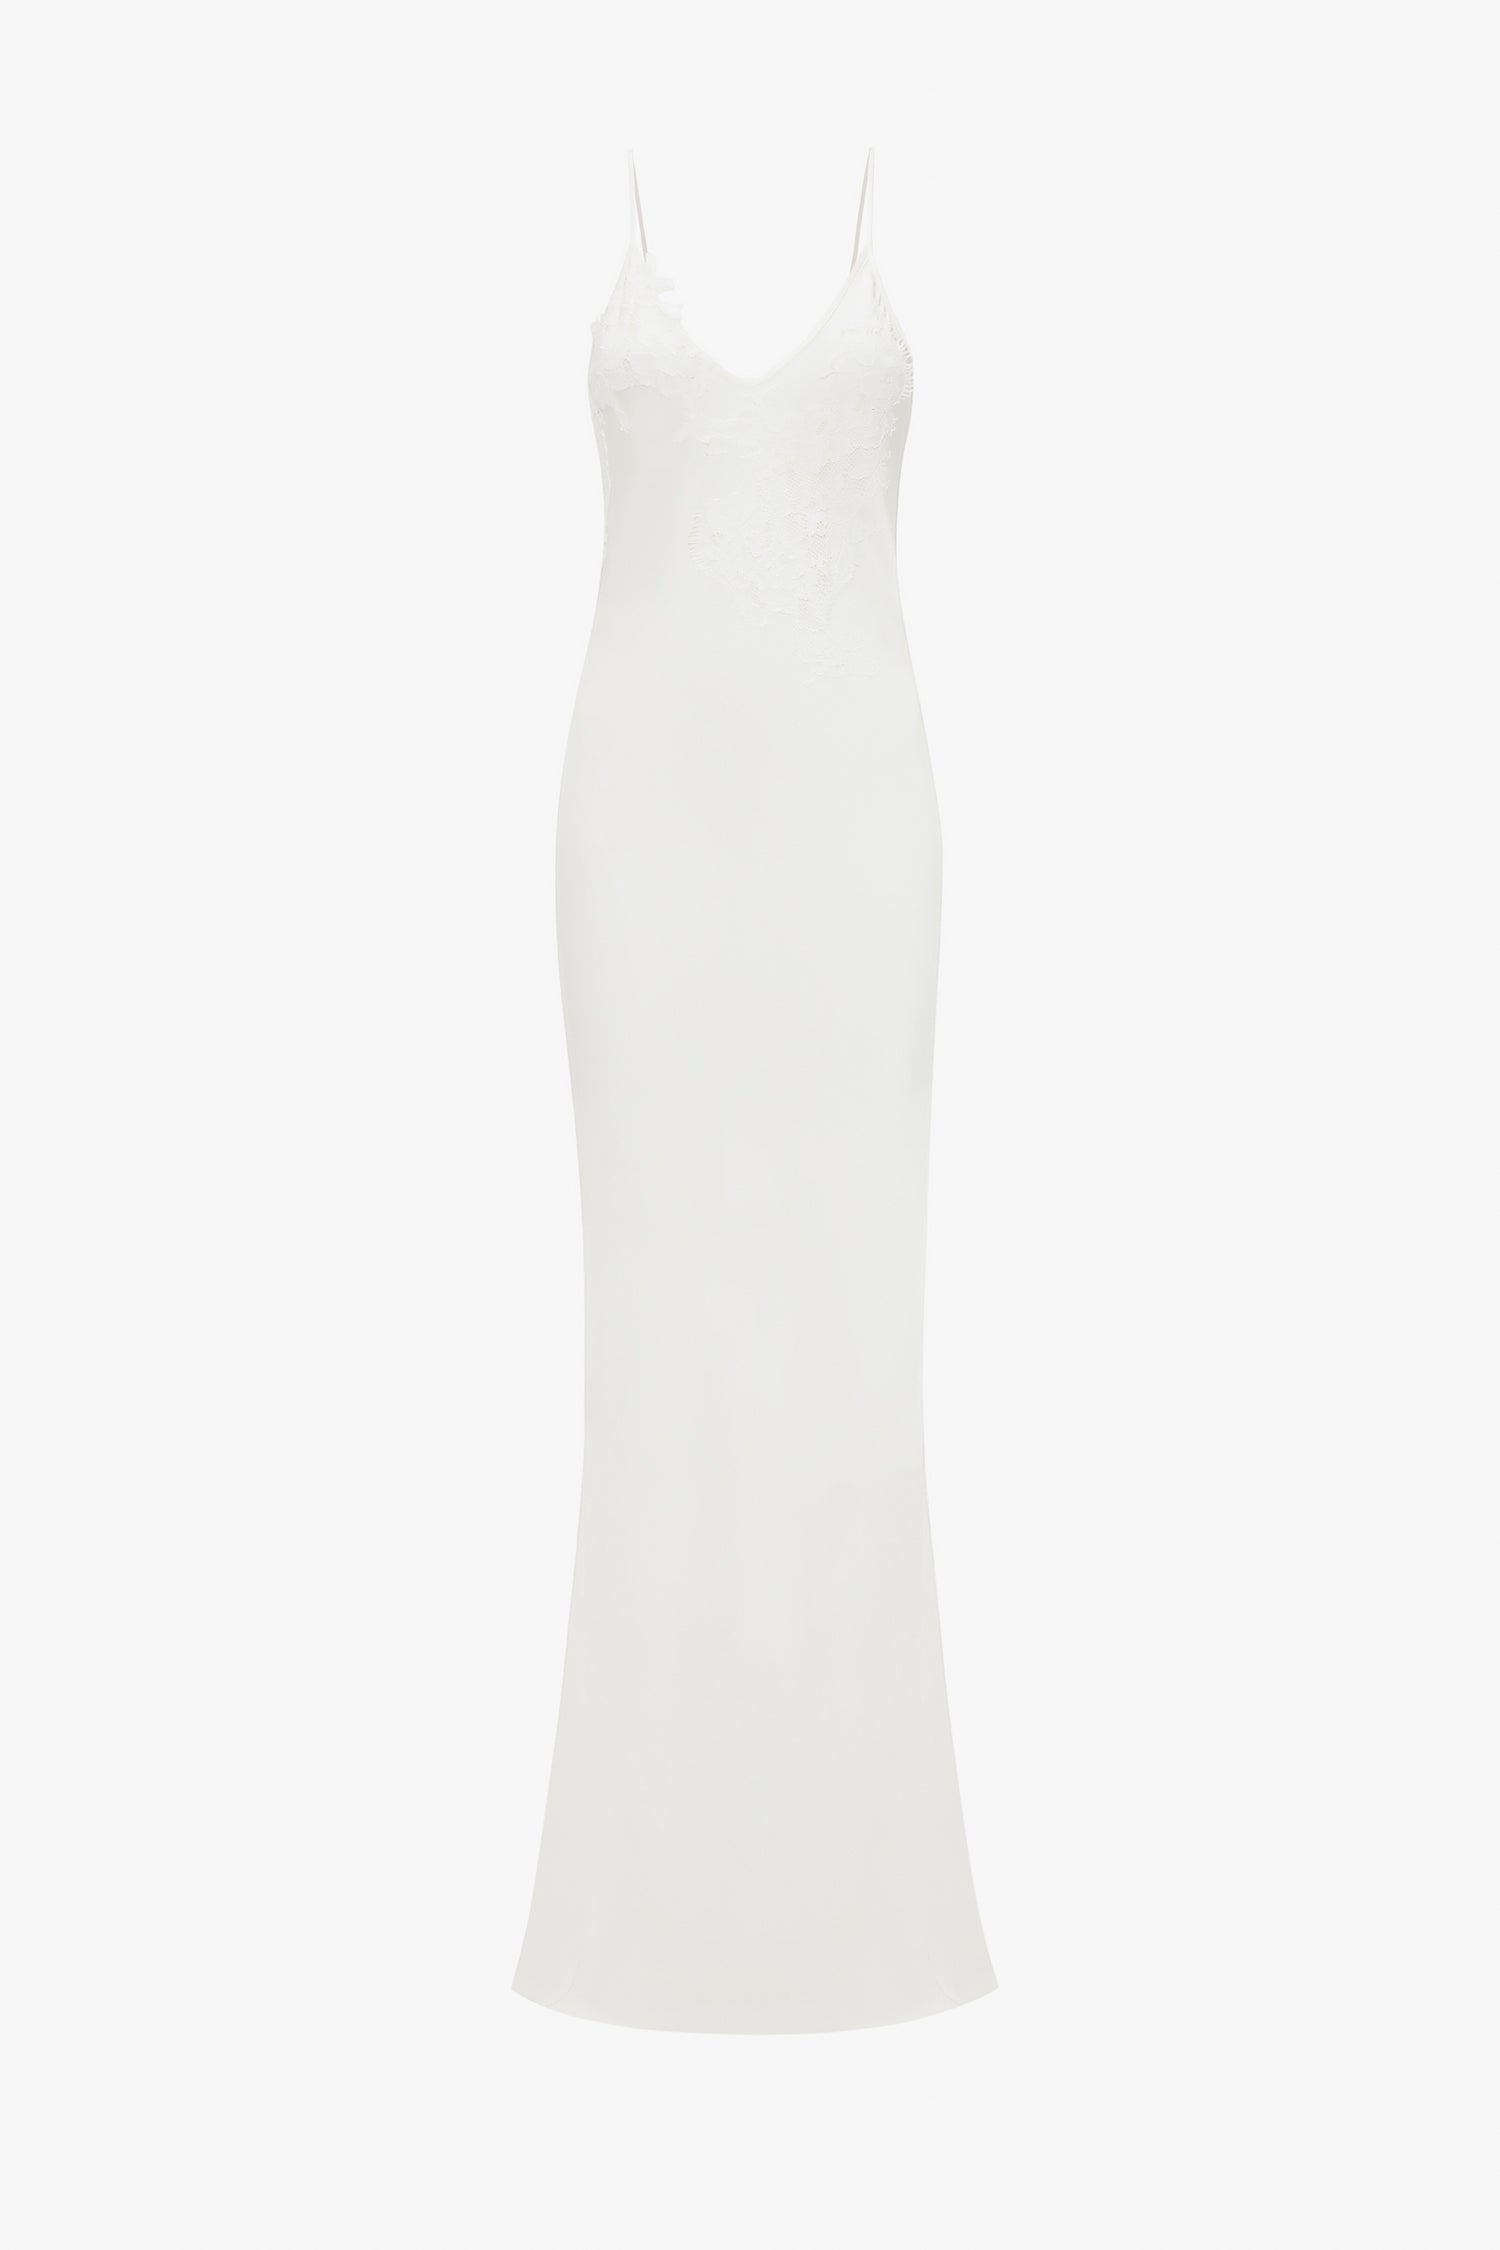 A white, sleeveless, floor-length evening dress with lace appliqué on the bodice, displayed against a white background by Victoria Beckham's Exclusive Lace Detail Floor-Length Cami Dress In Ivory.